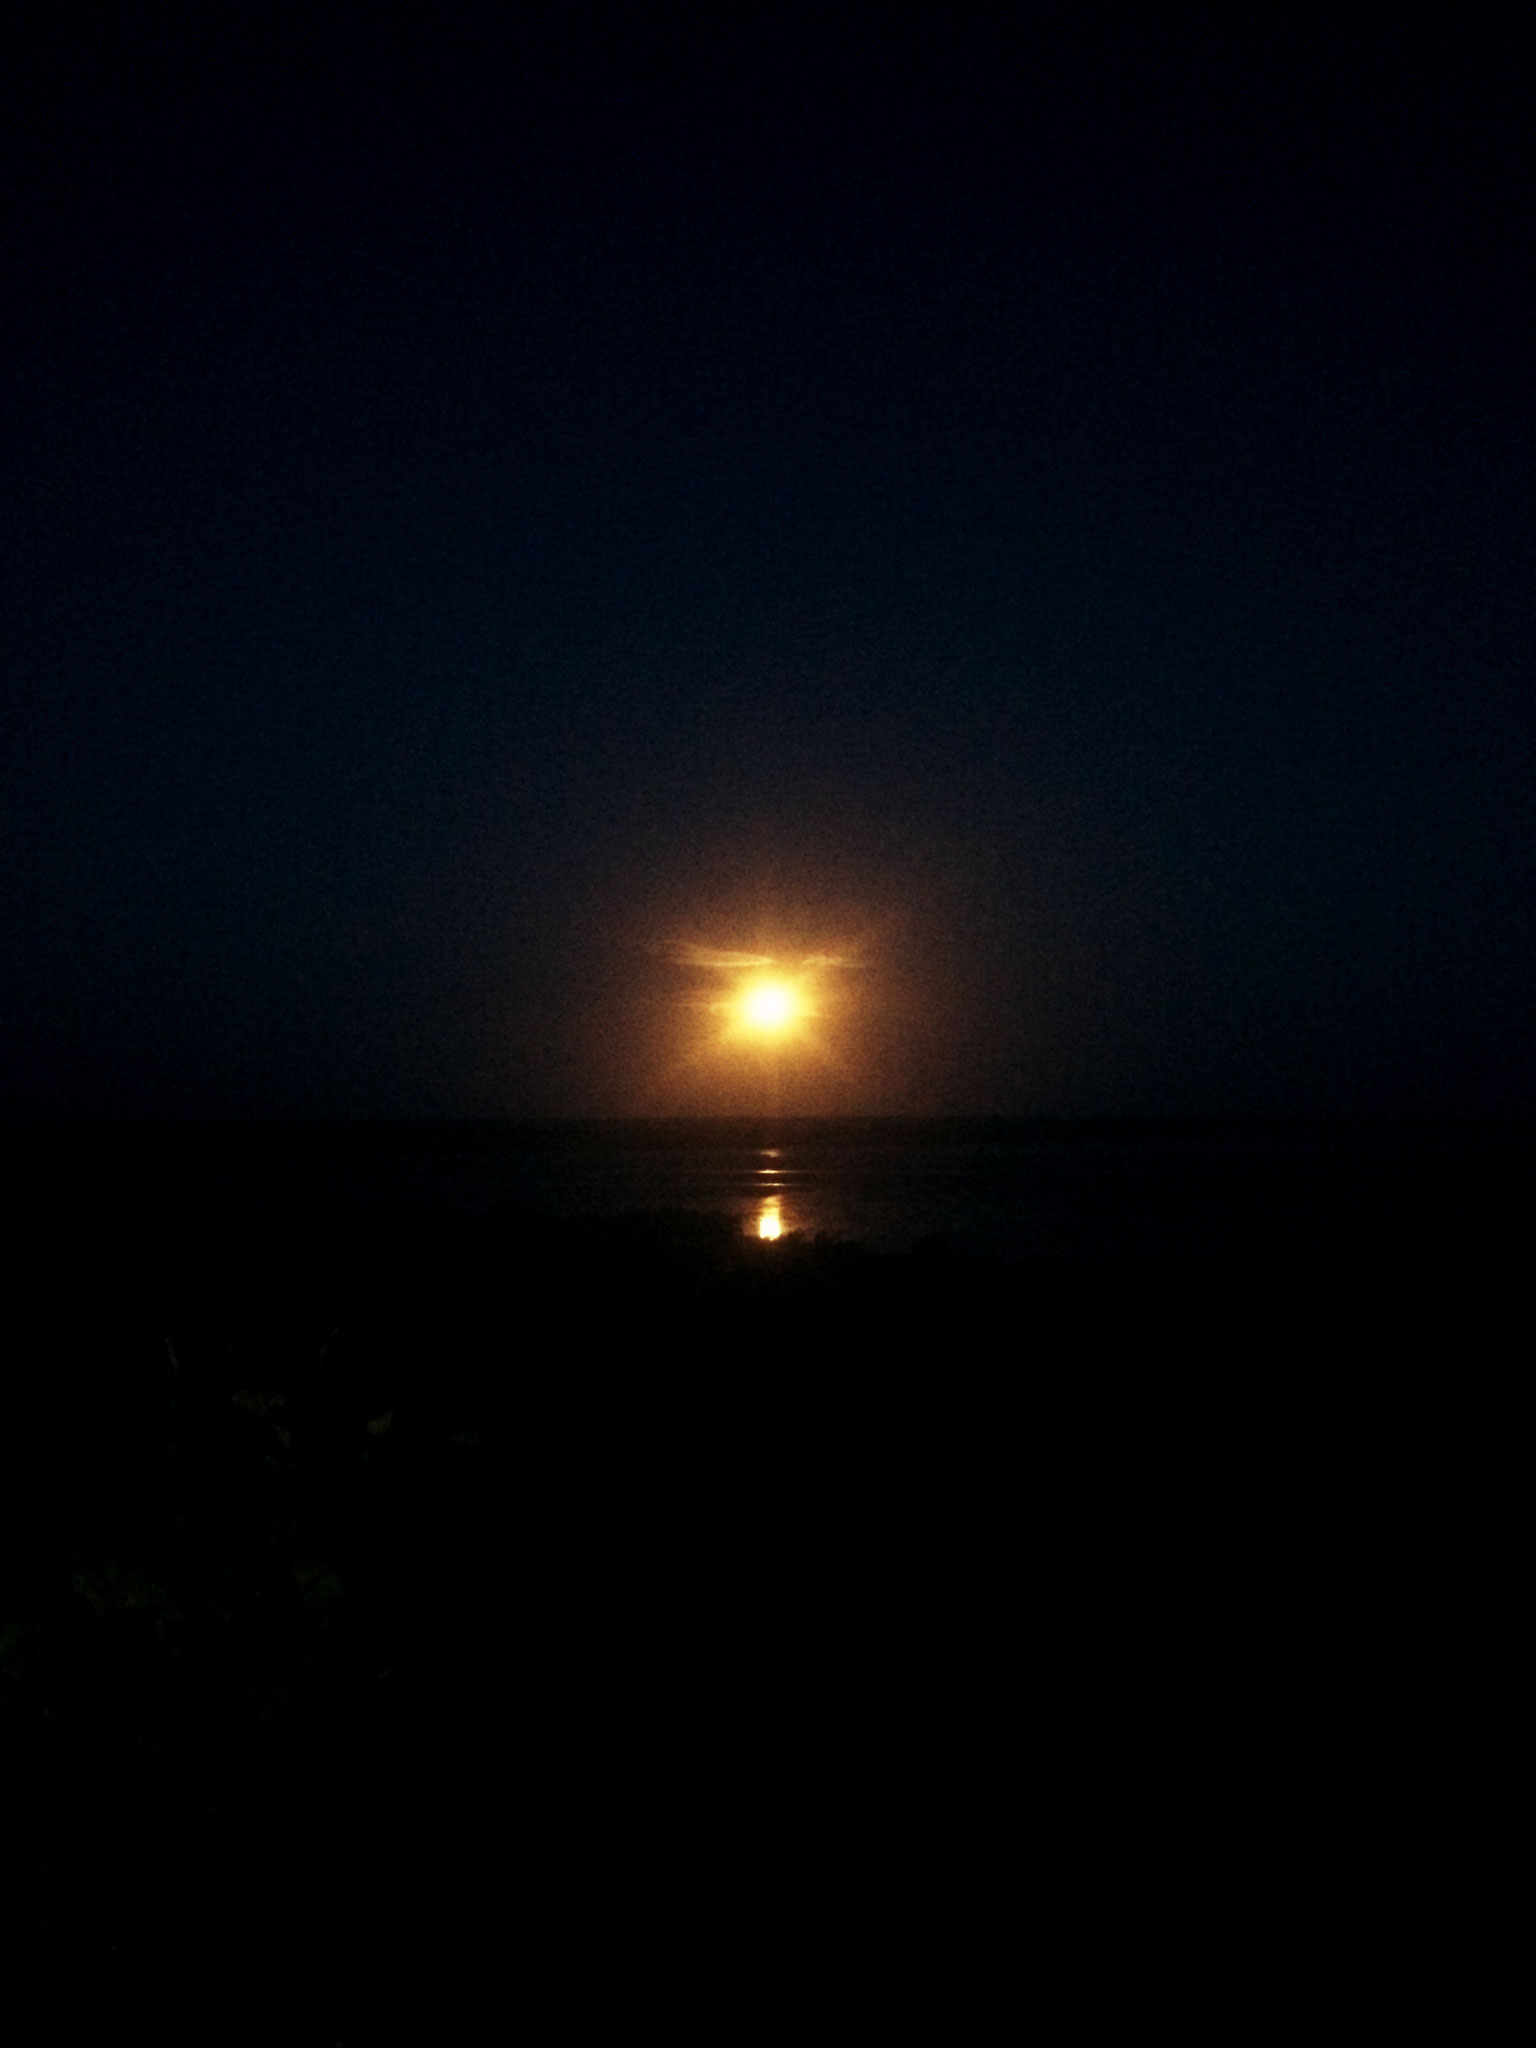 "Staircase to the moon" in Broome